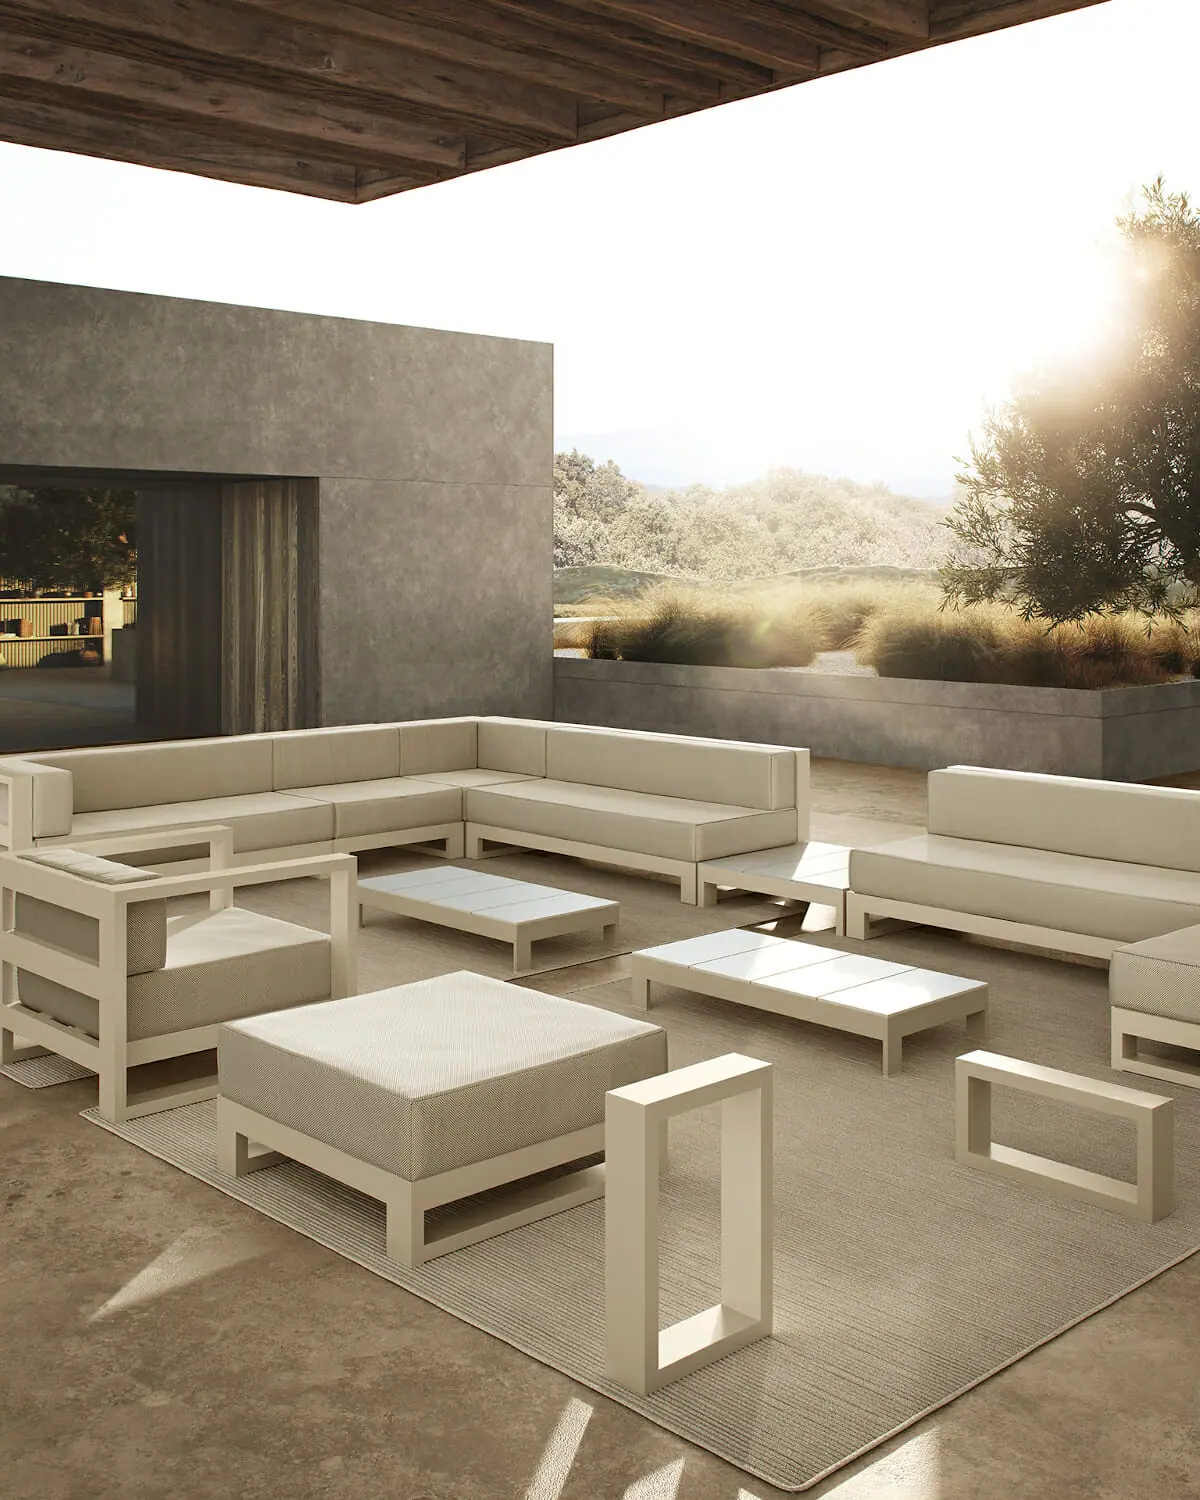 83491-83490-posidonia-outdoor-furniture-collection